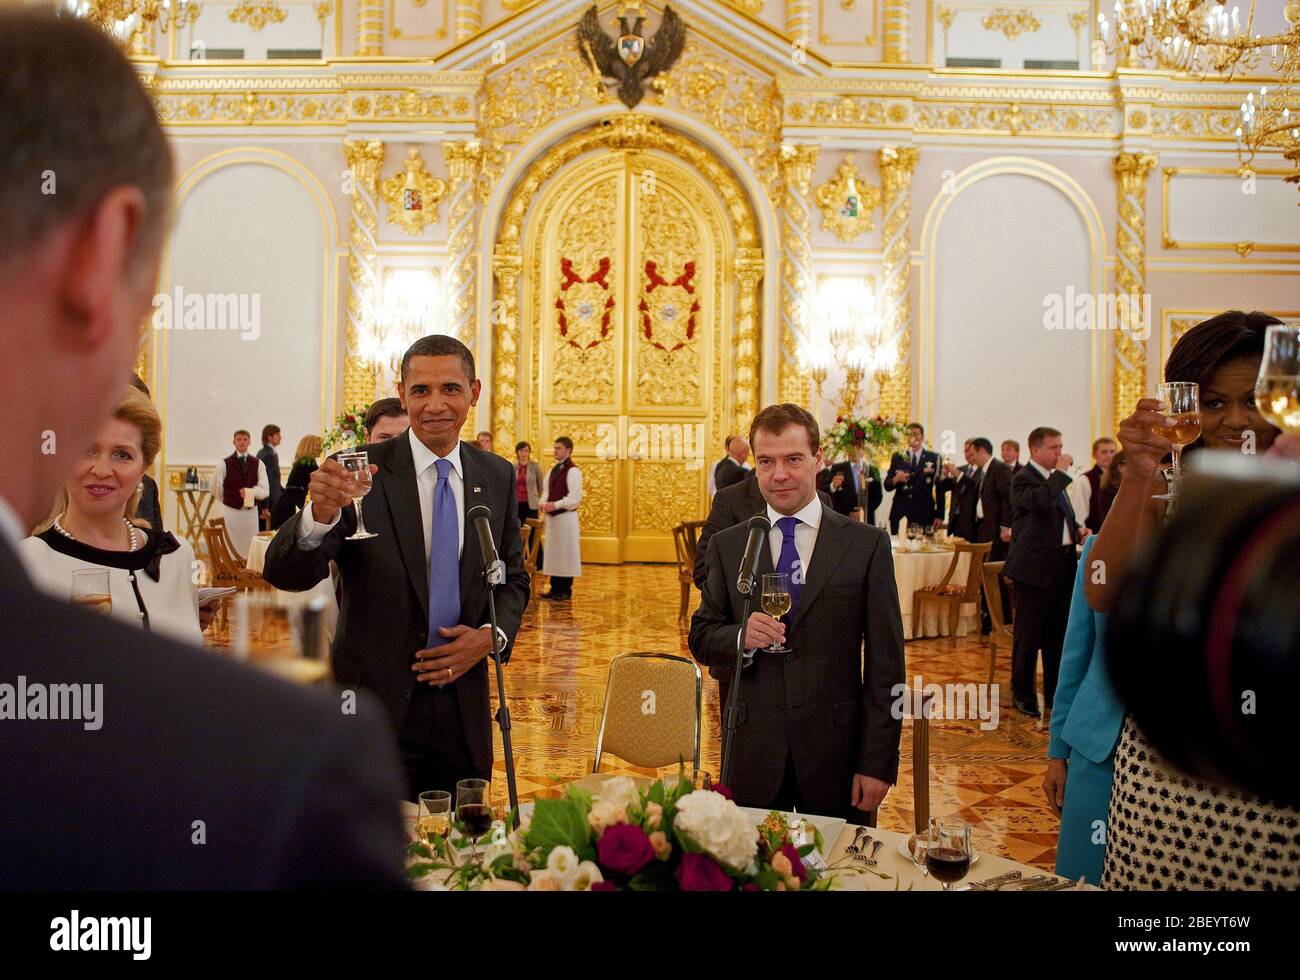 President Barack Obama and First Lady Michelle Obama attend a reception in the Kremlin with Russian President Dimitry Medvedev, his wife Svetlana Medvedeva, and the Russian Orthodox Patriarch Moscow, Russia, July 7, 2009 Stock Photo